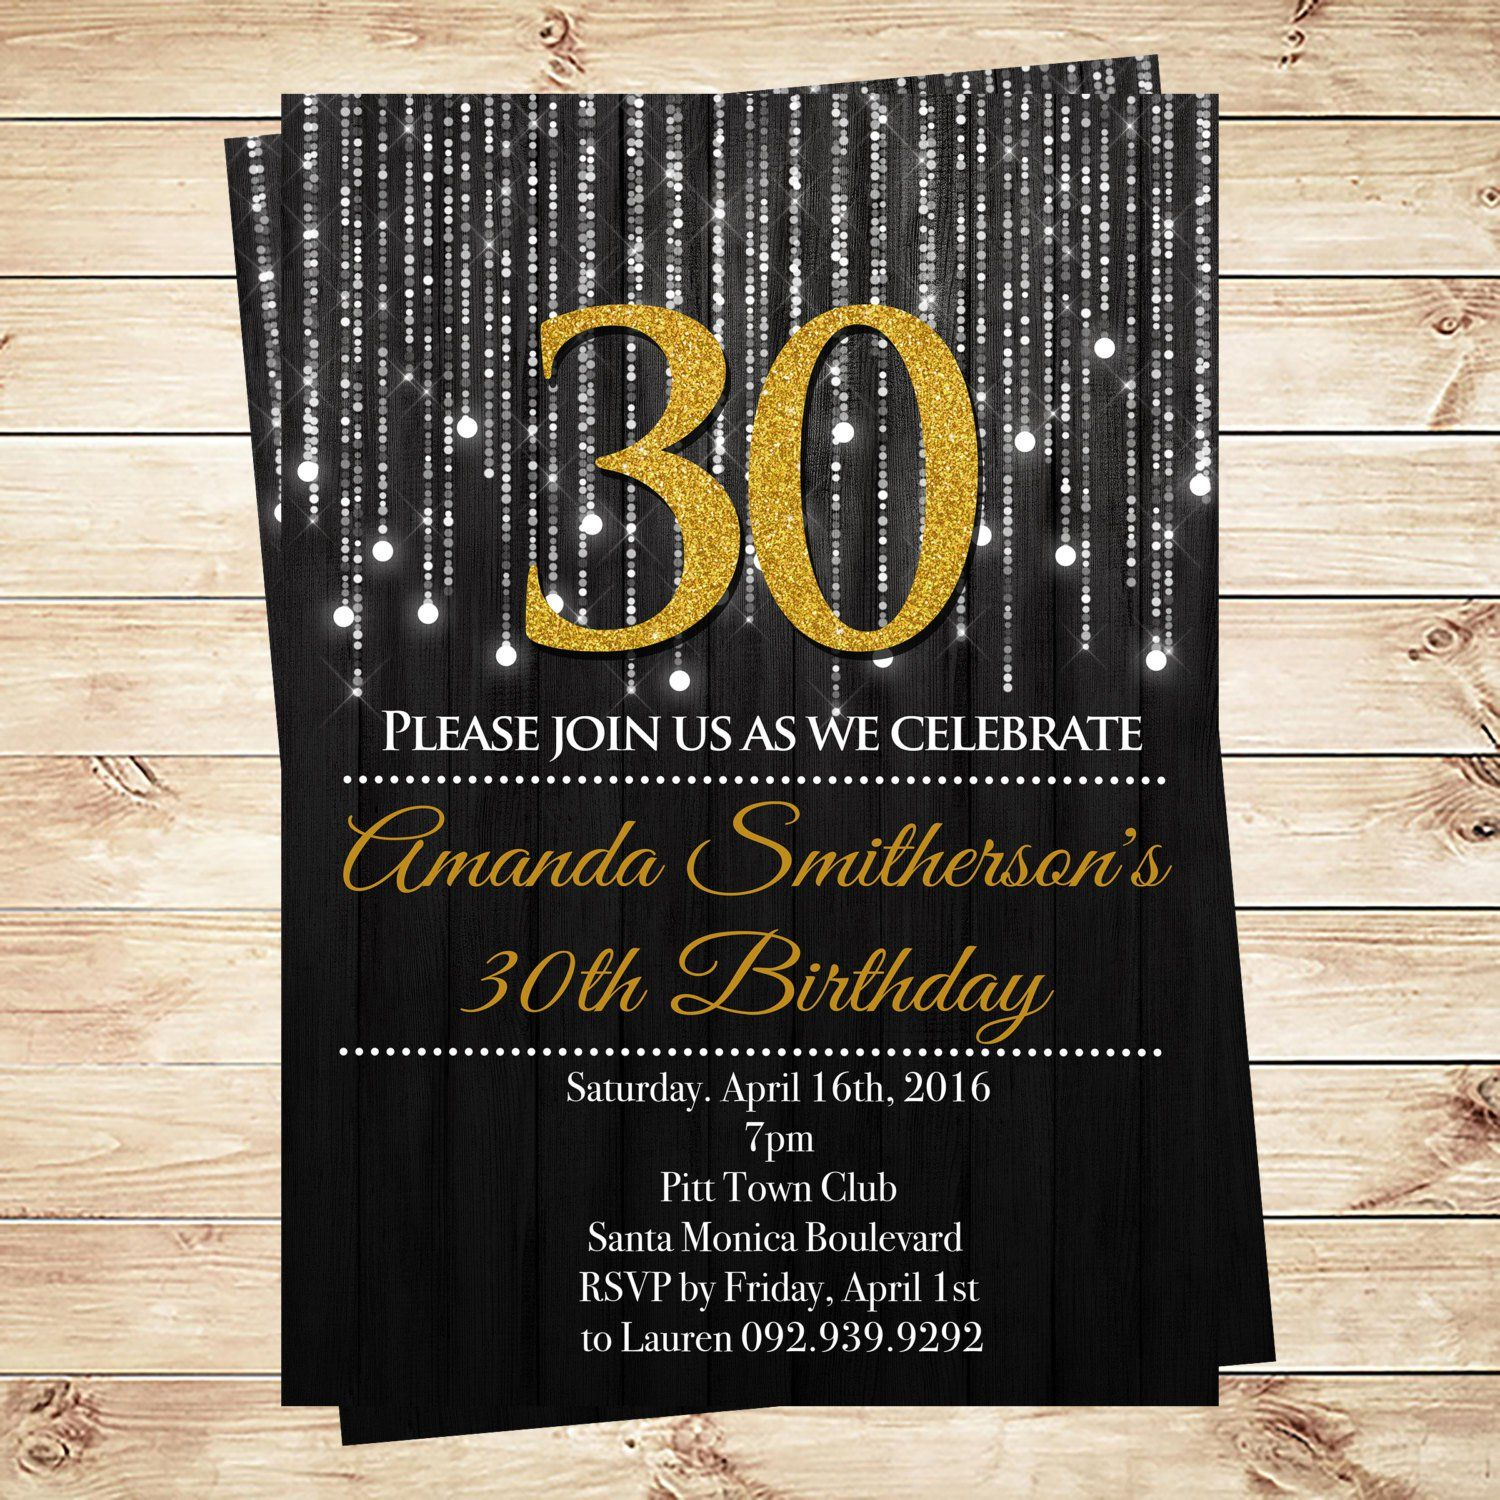 30th Birthday Invitation Templates For Her • Business Template Ideas